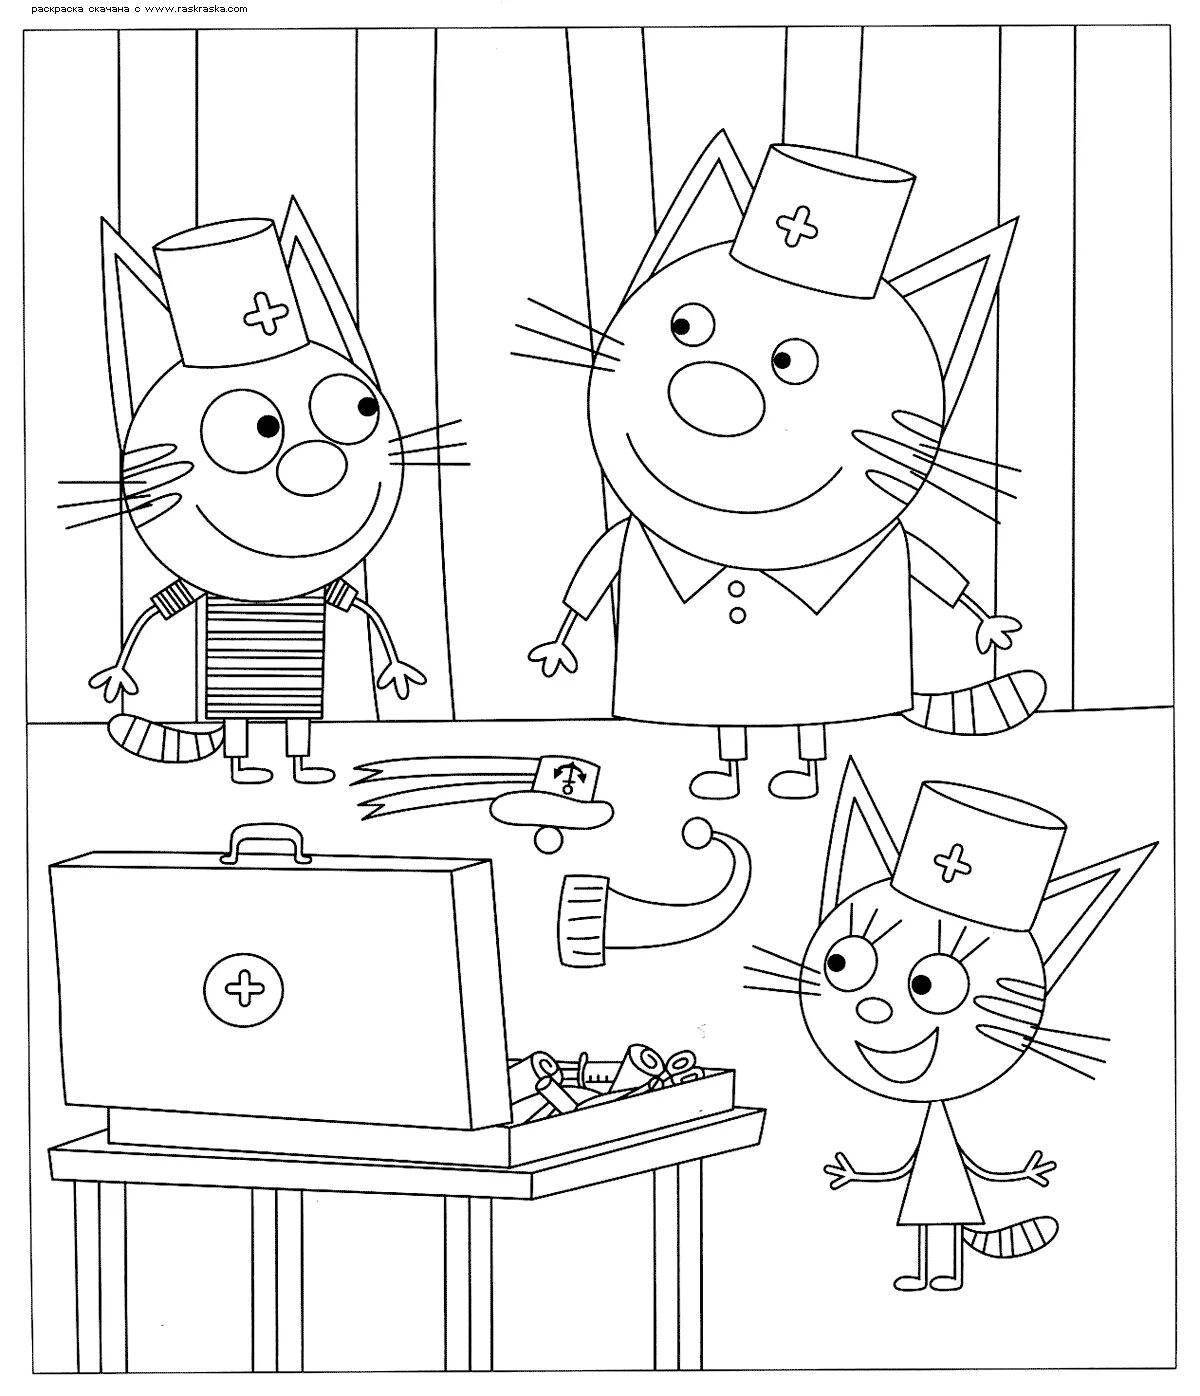 Three cats game for kids #6